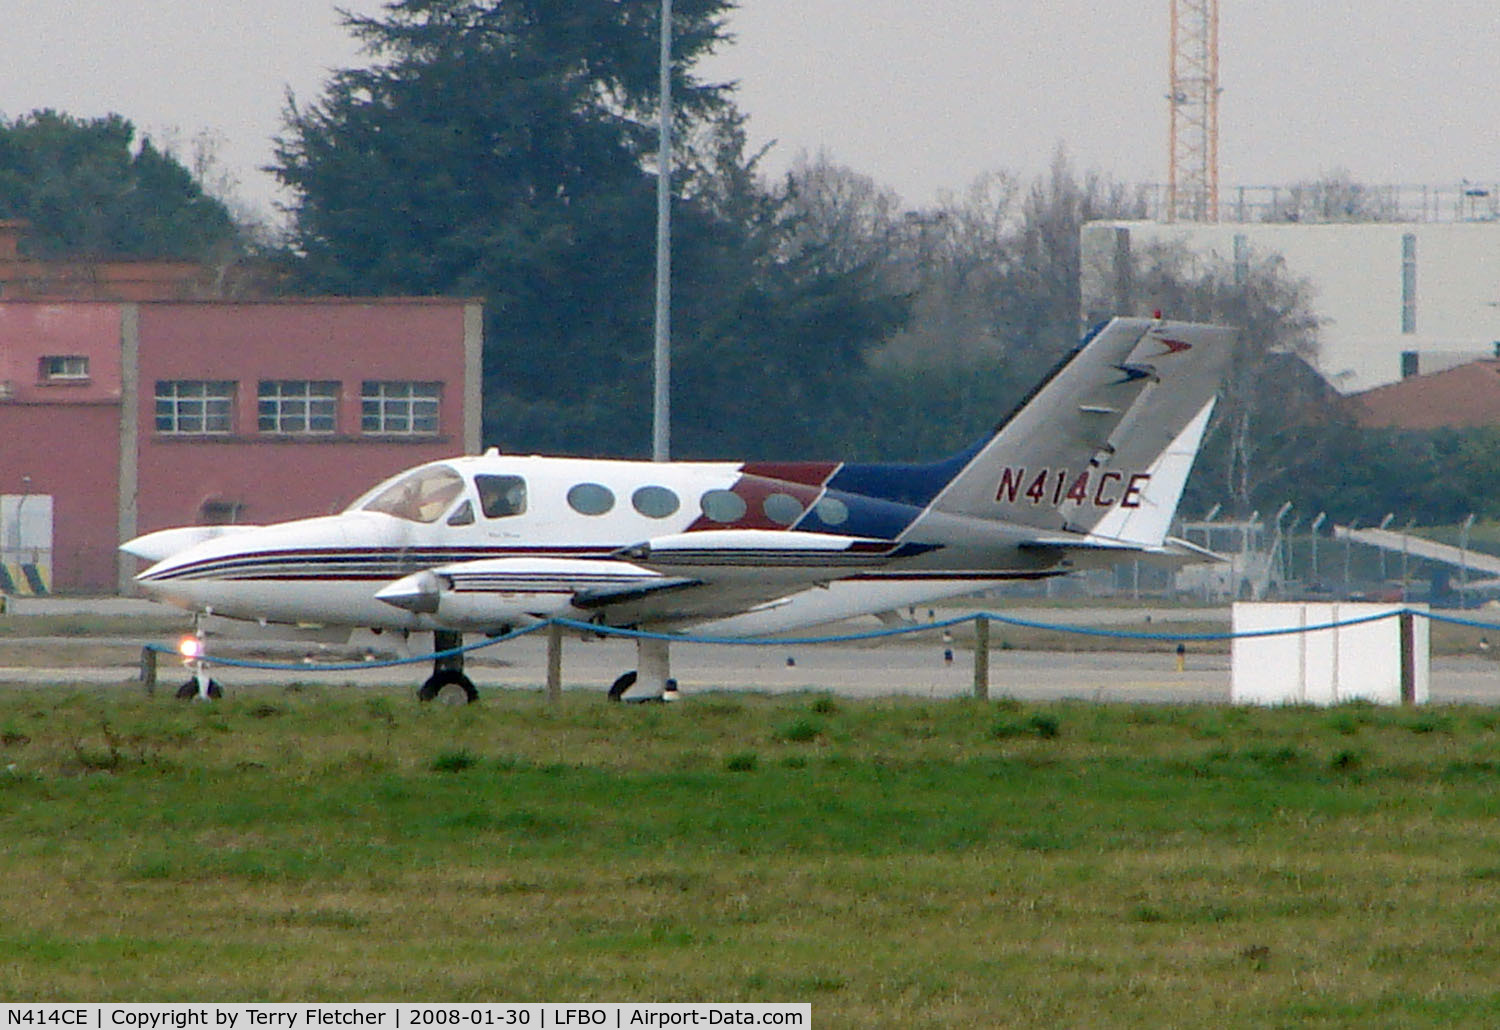 N414CE, 1976 Cessna 414 Chancellor C/N 414-0904, Cessna 414 far from home in Toulouse France in January 2008